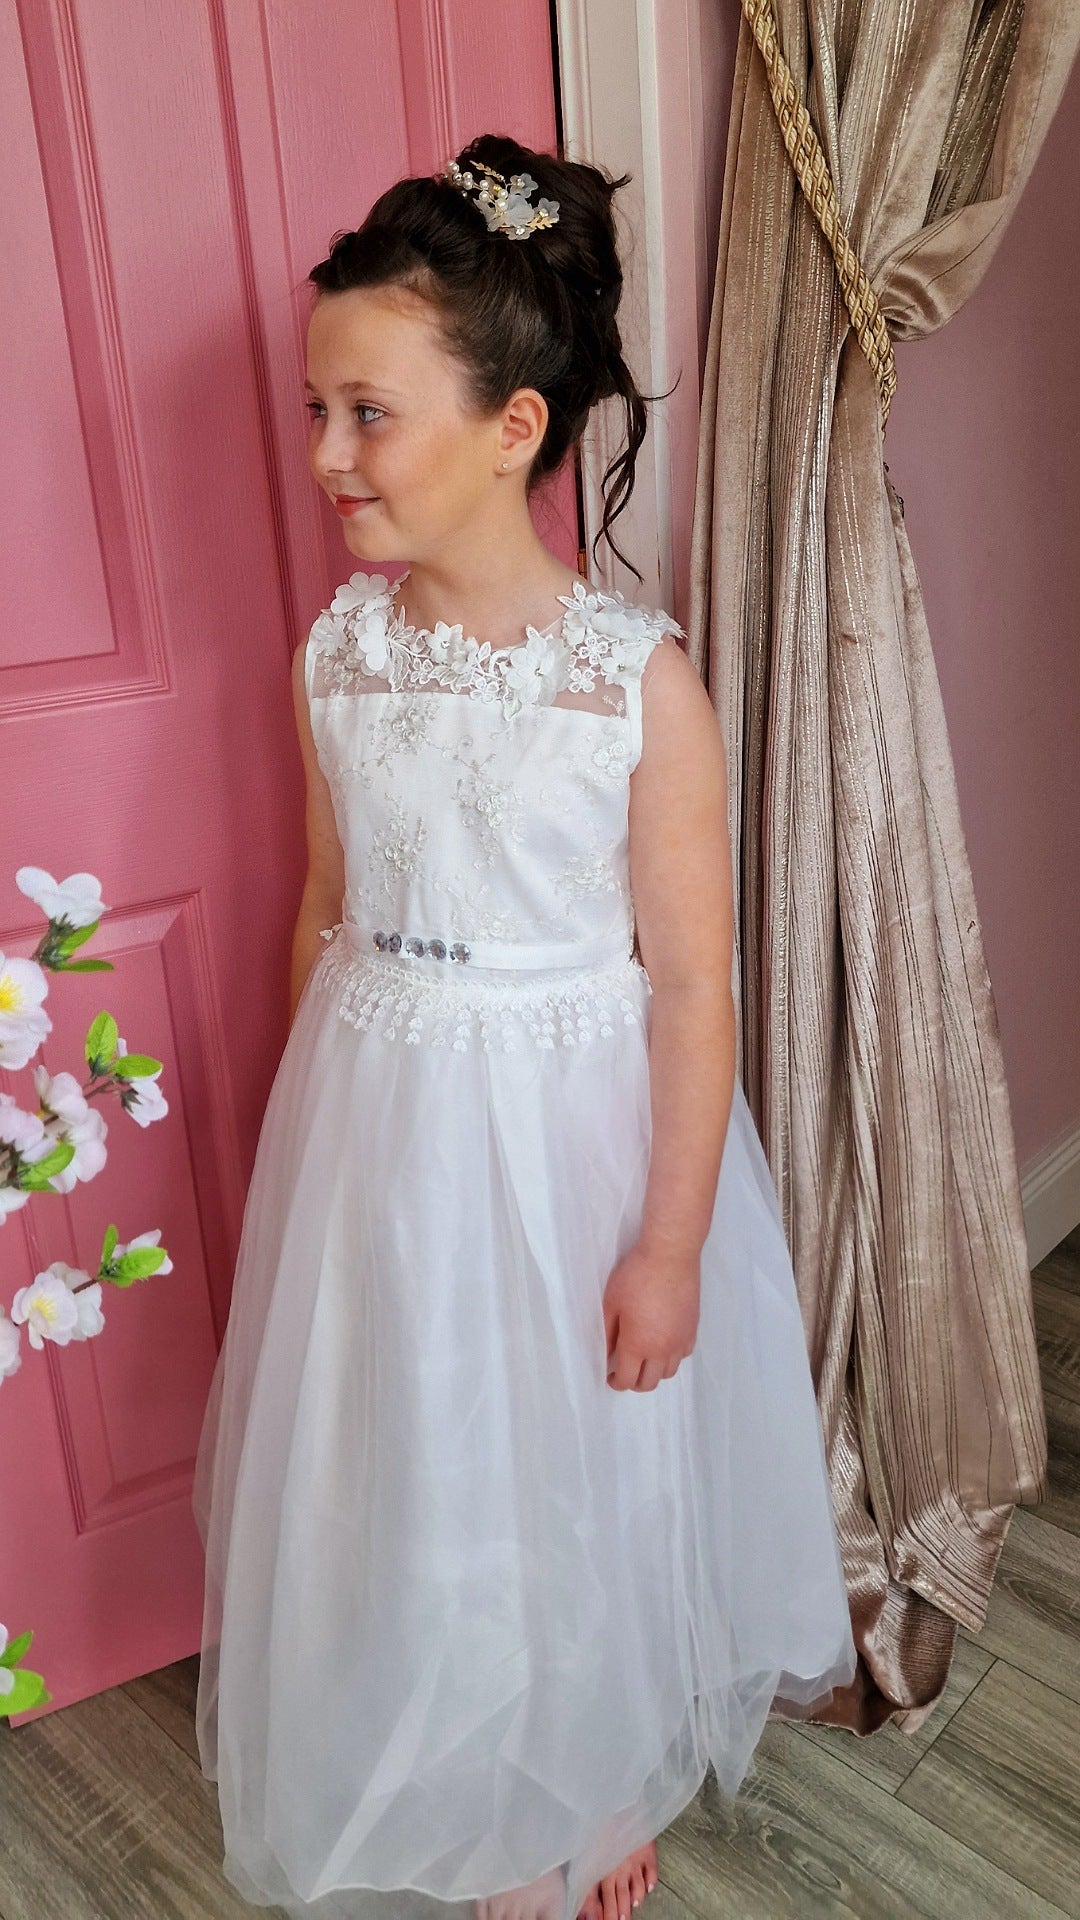 Cliona White Laced Top Flower Girl Dress